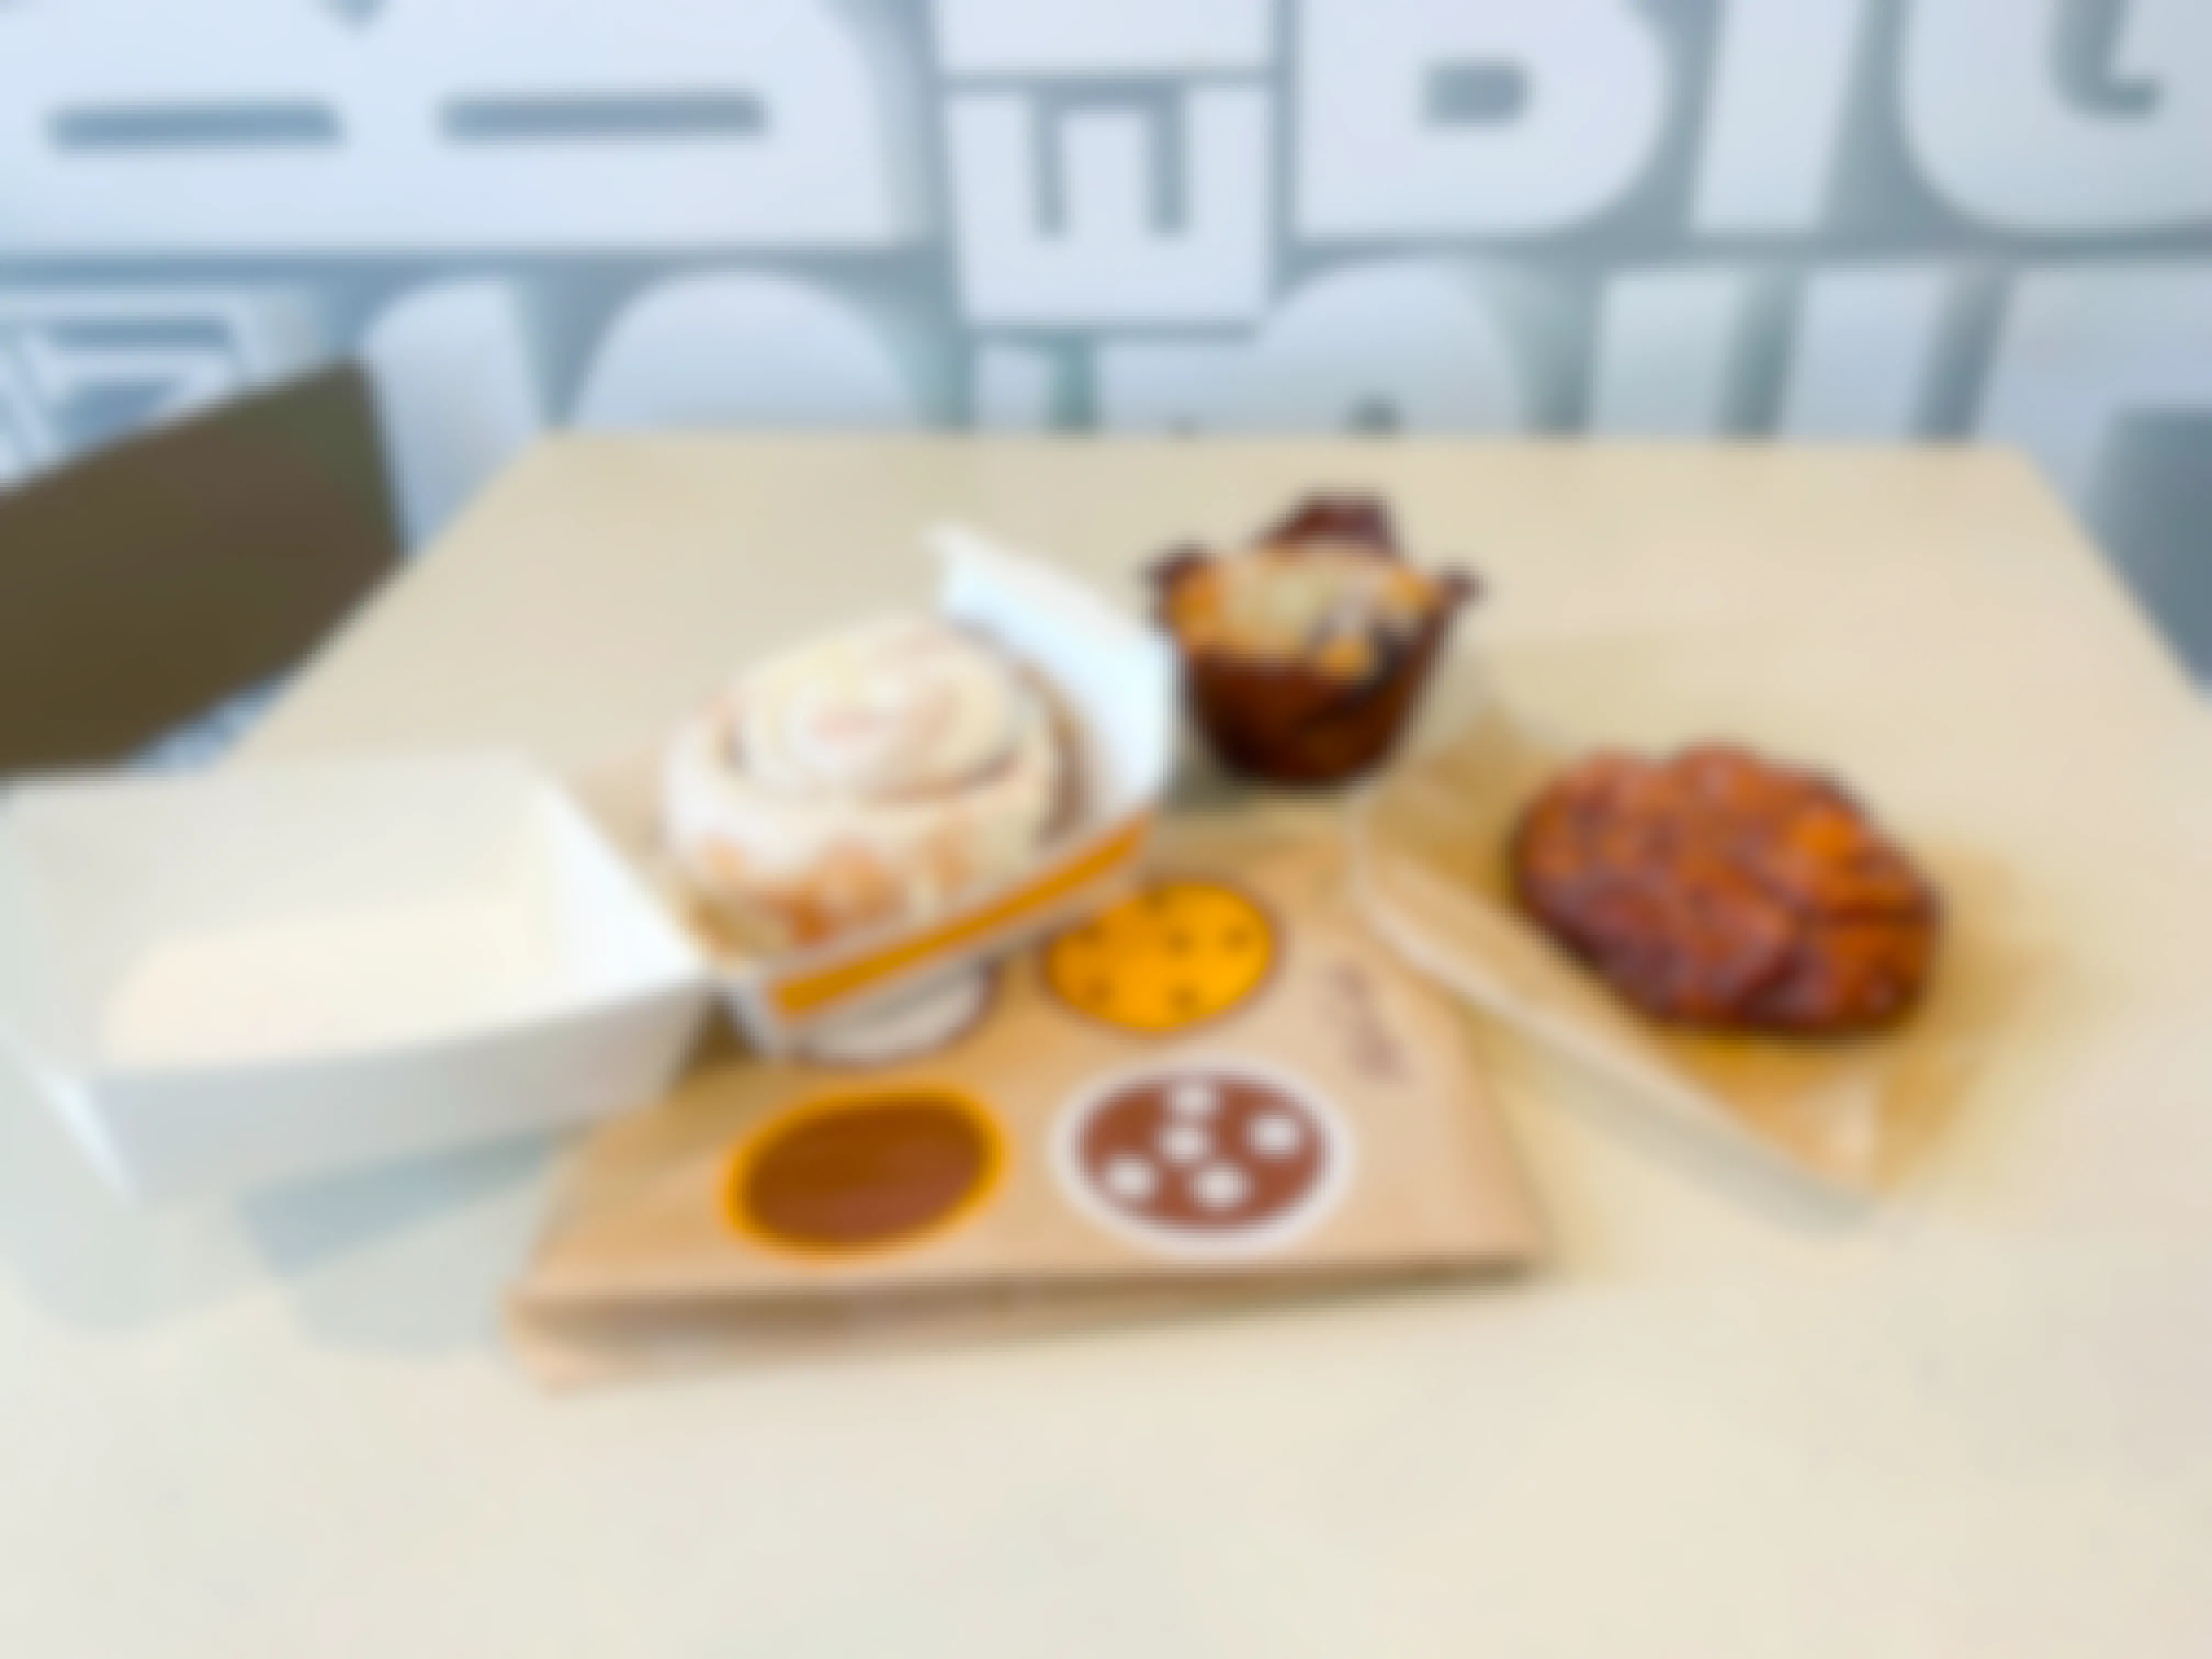 McDonald's Discontinuing Cinnamon Rolls, Apple Fritters & Blueberry Muffins From Menu